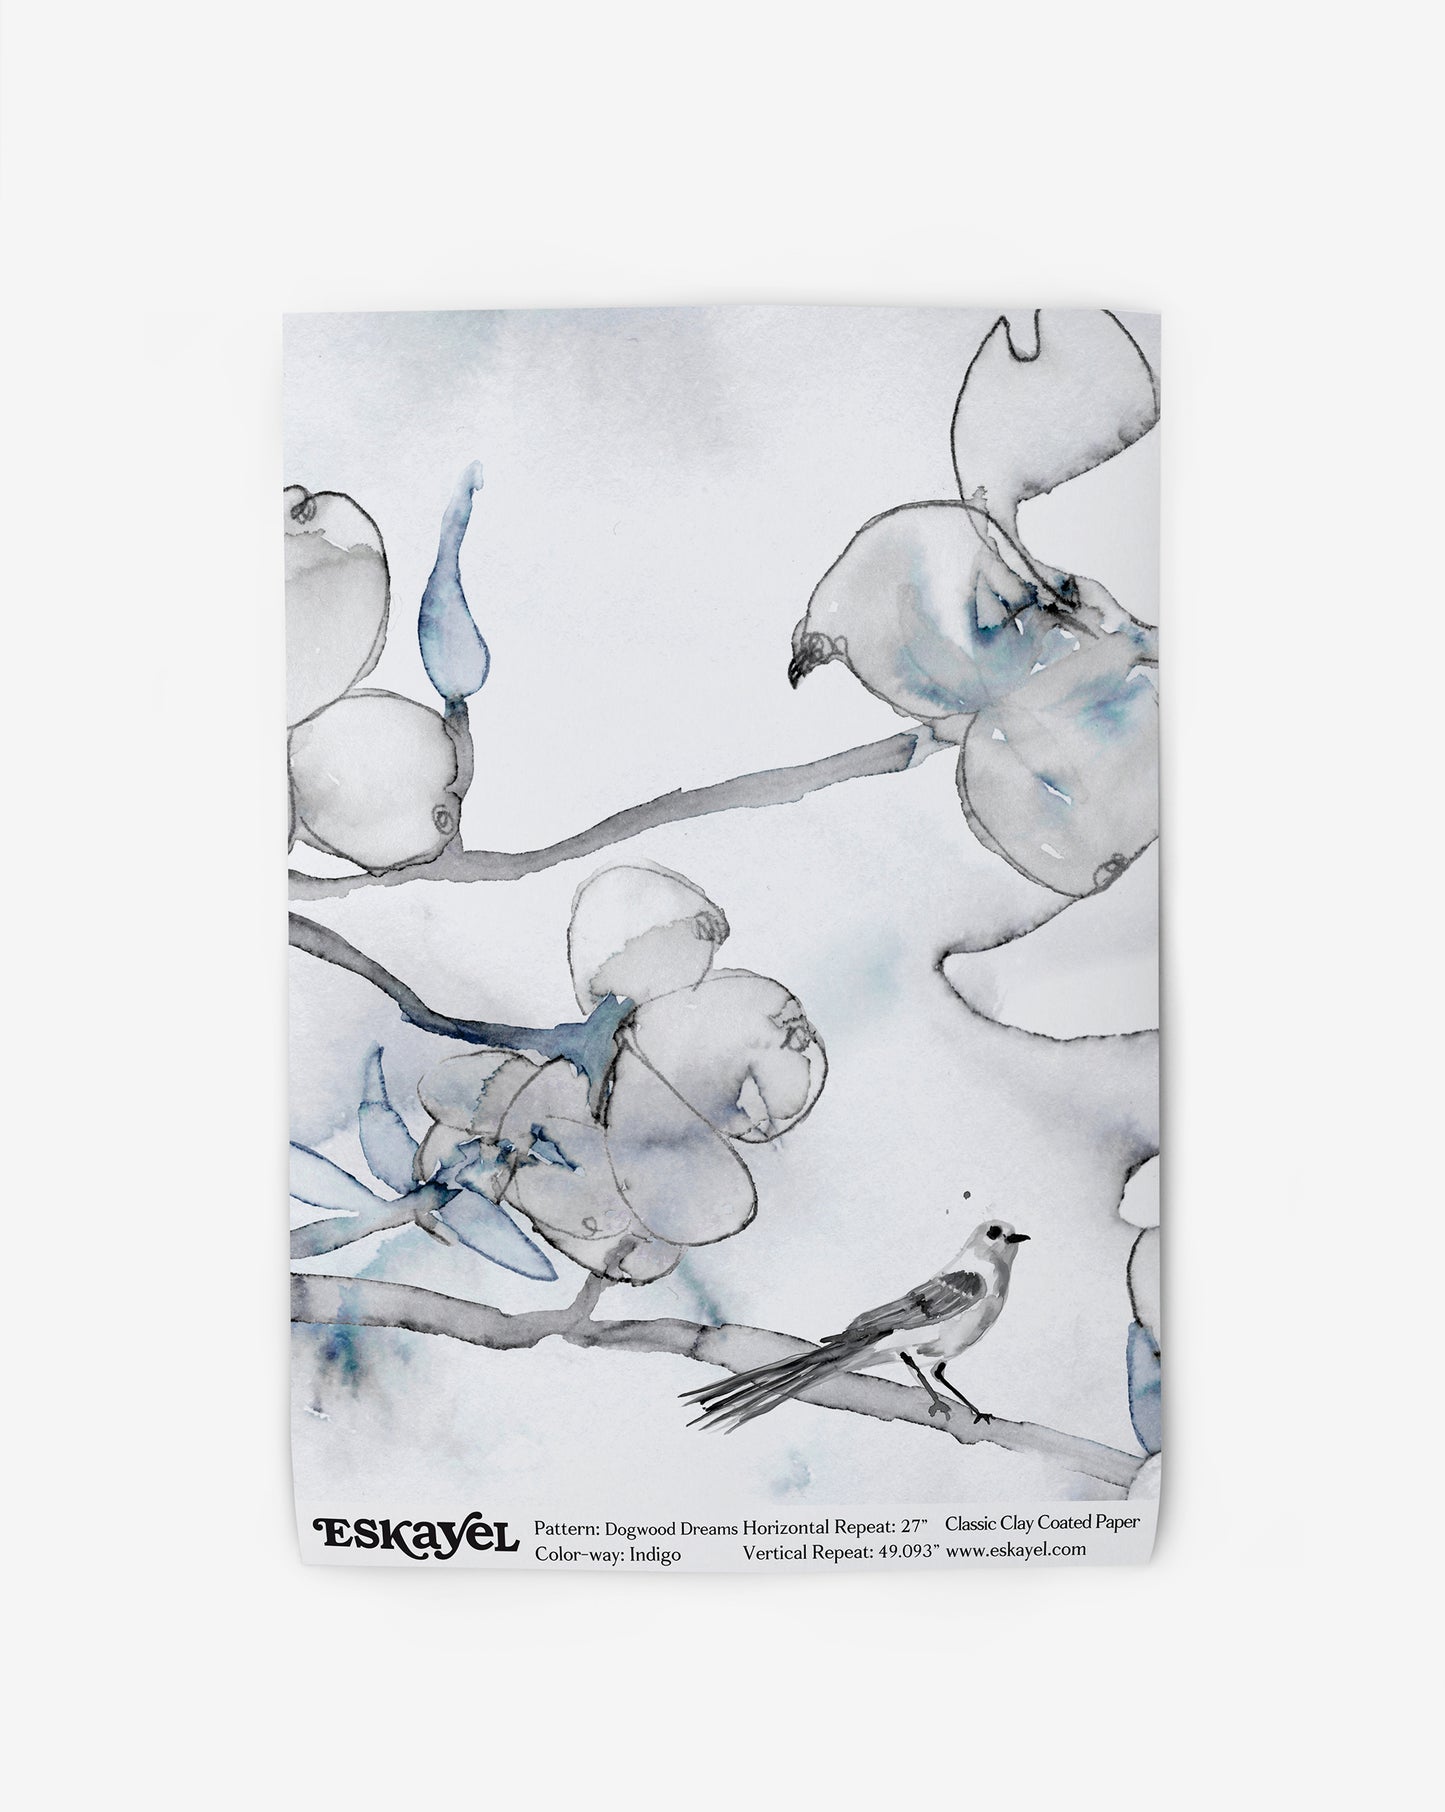 A blue and white Dogwood Dreams Wallpaper Indigo colorway wallpaper with birds on a branch